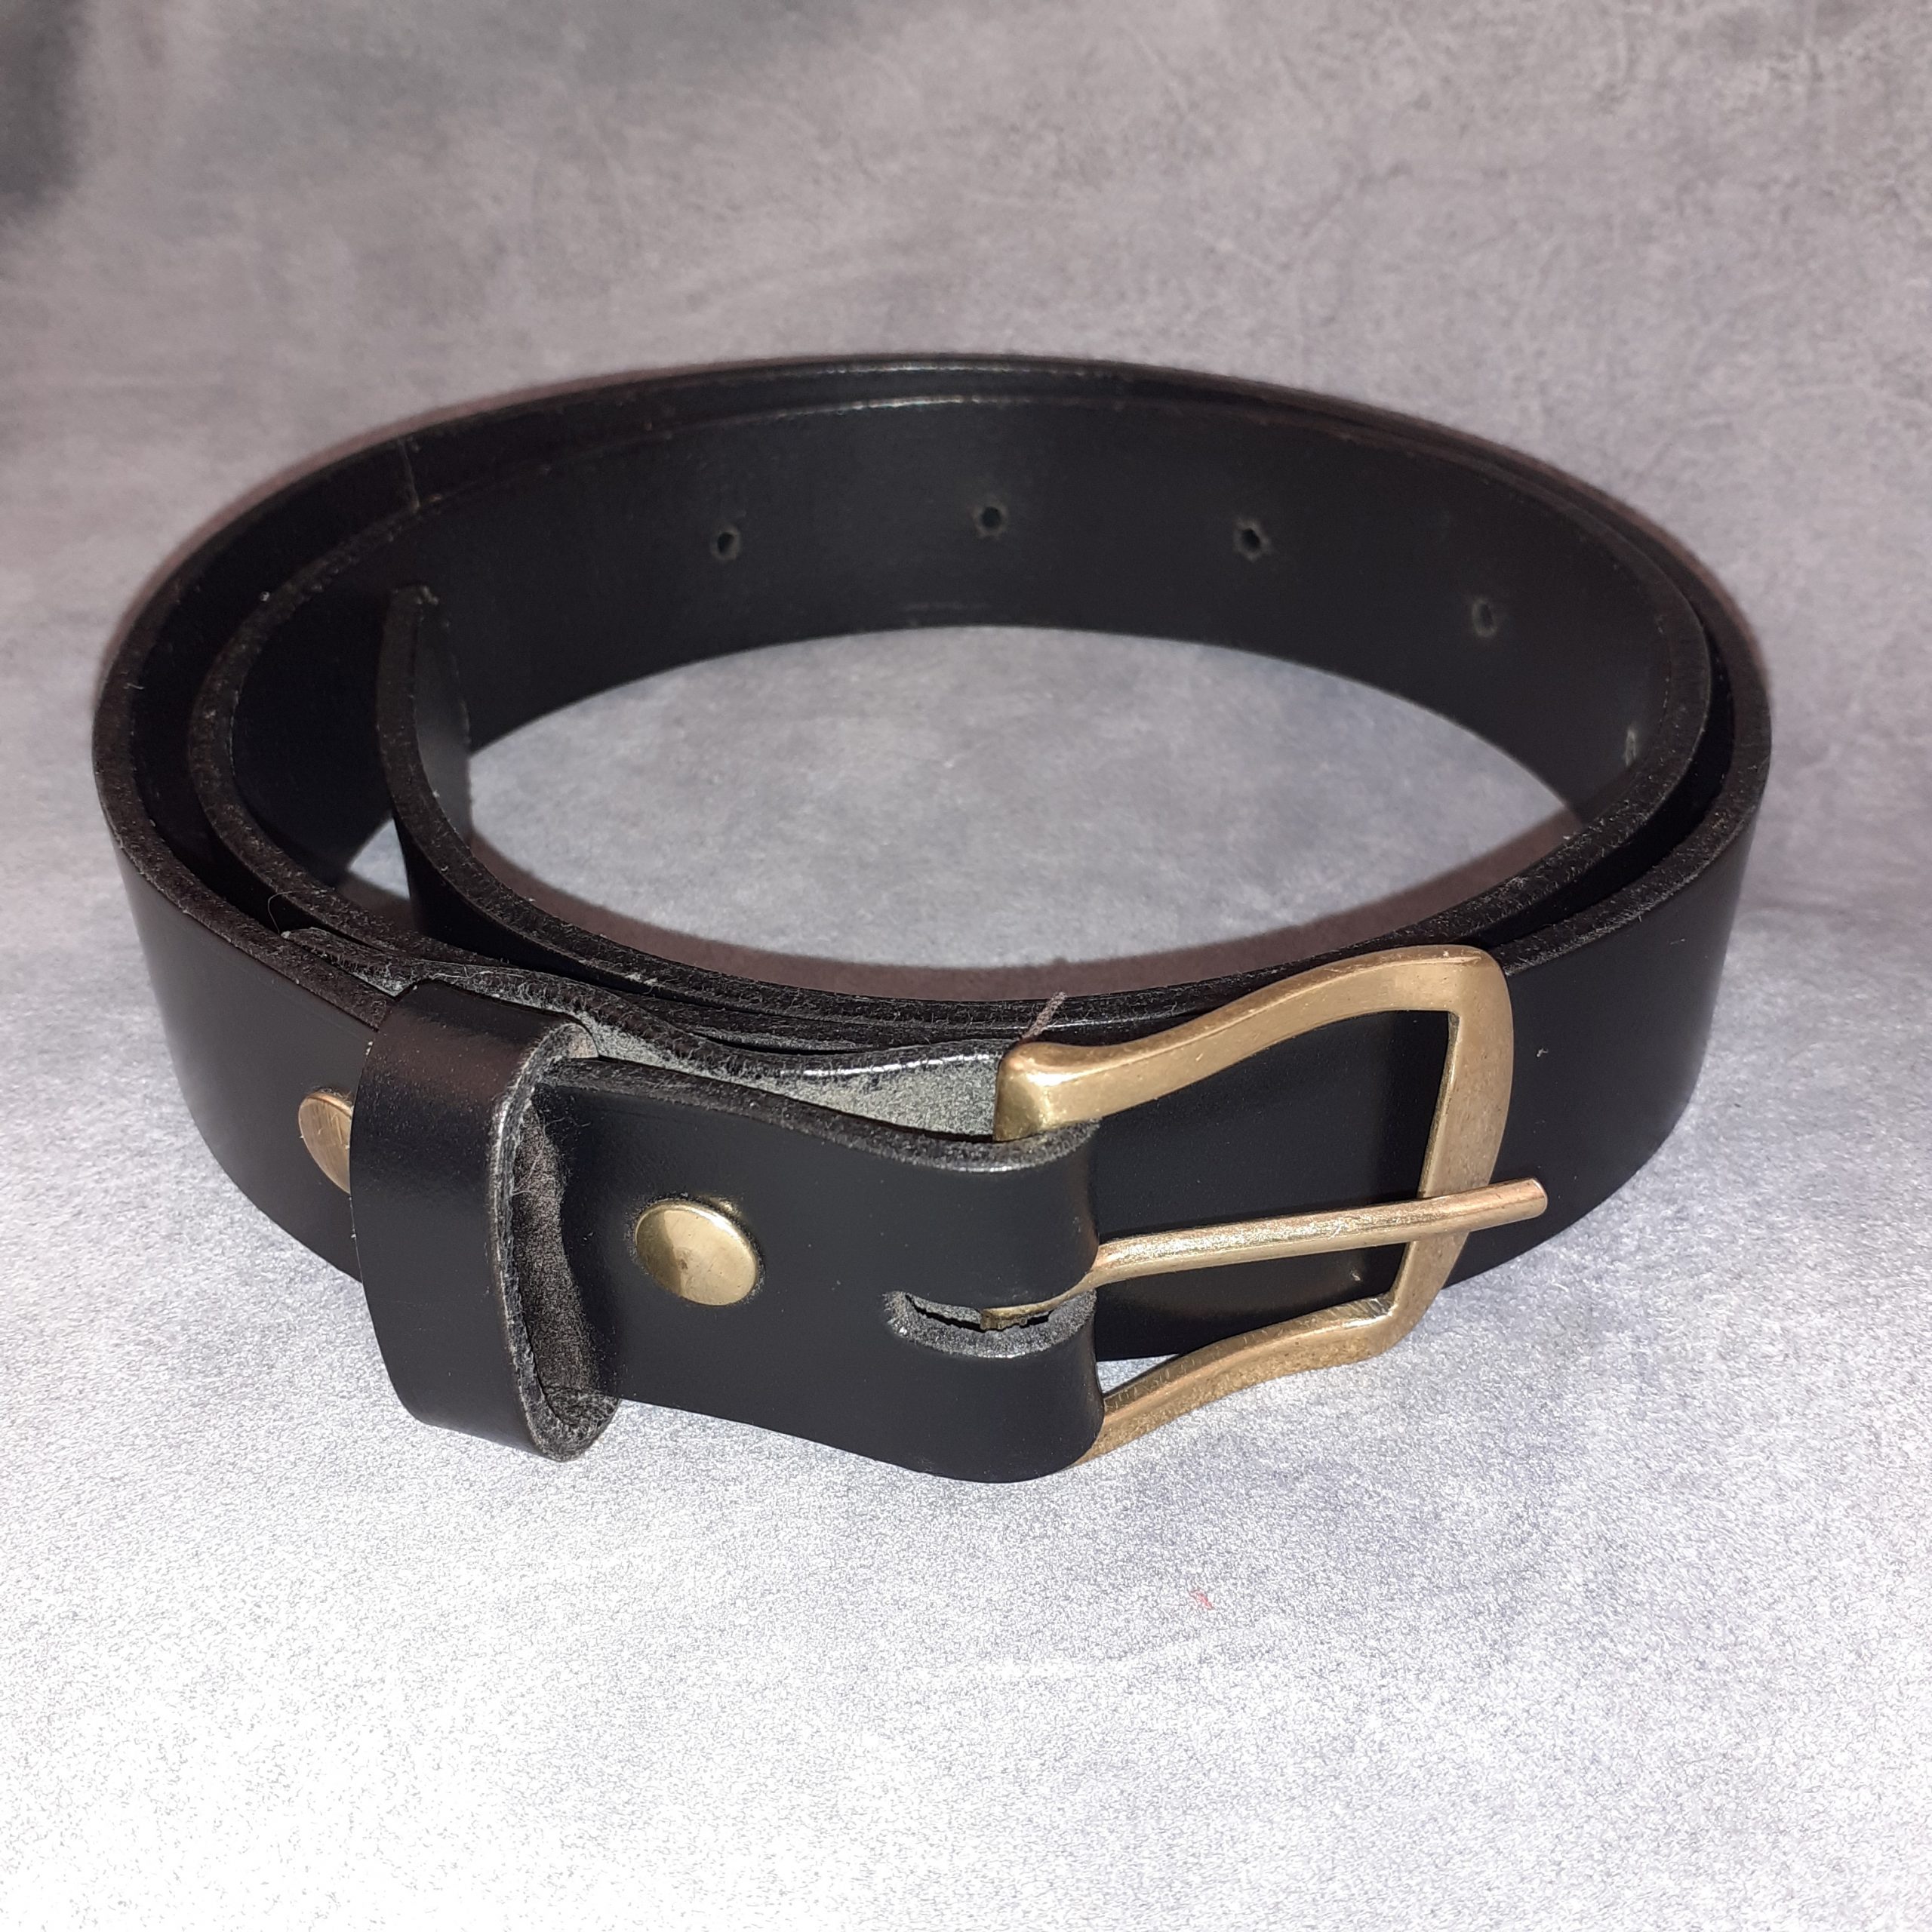 Top Quality Leather Waist Belt (Sports Buckle)in S, M & L Sizes - John ...